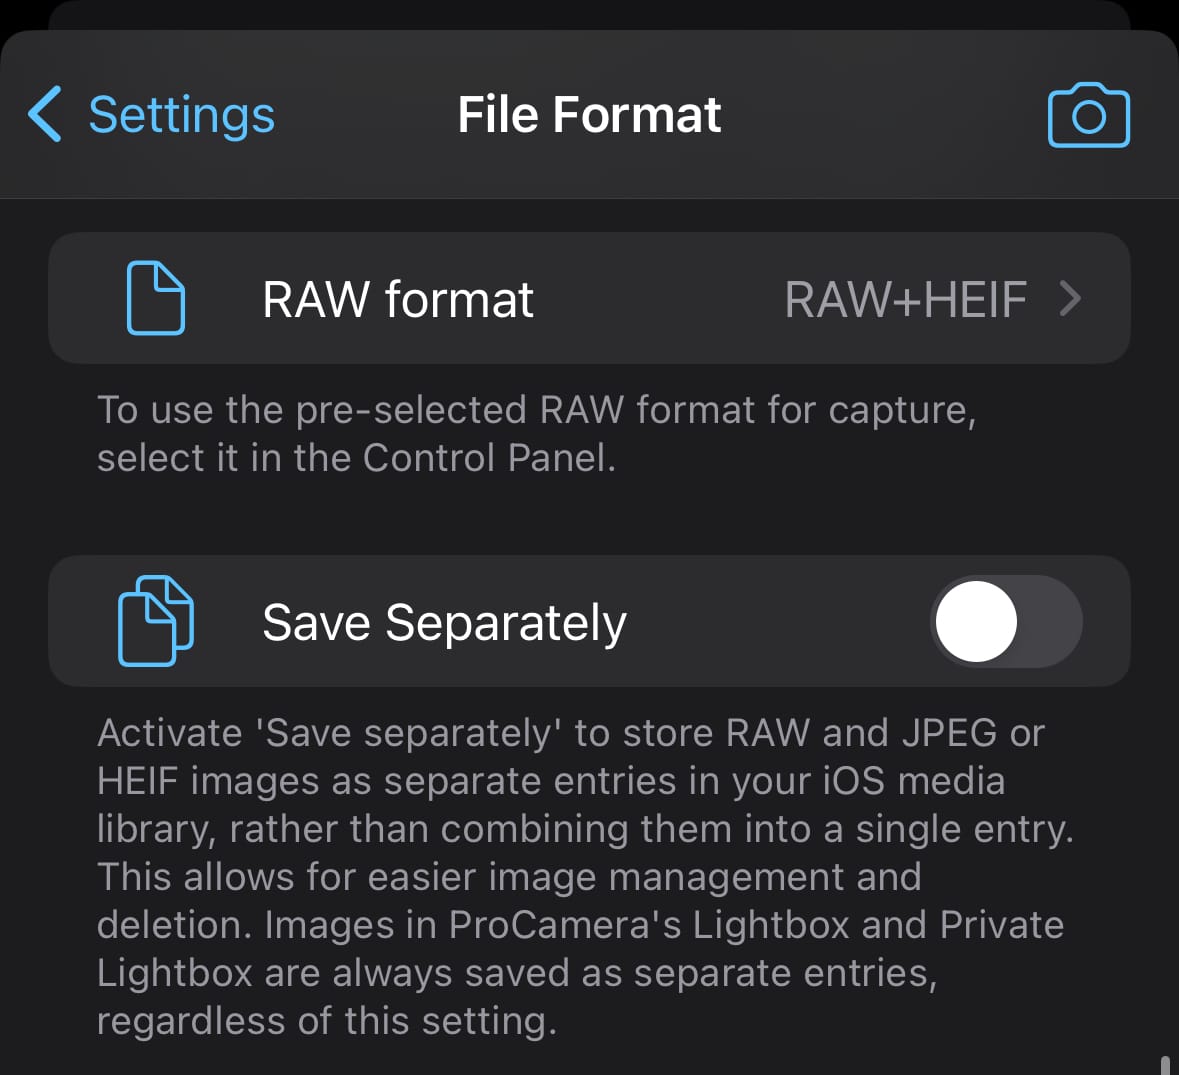 Save RAW and processed file separately